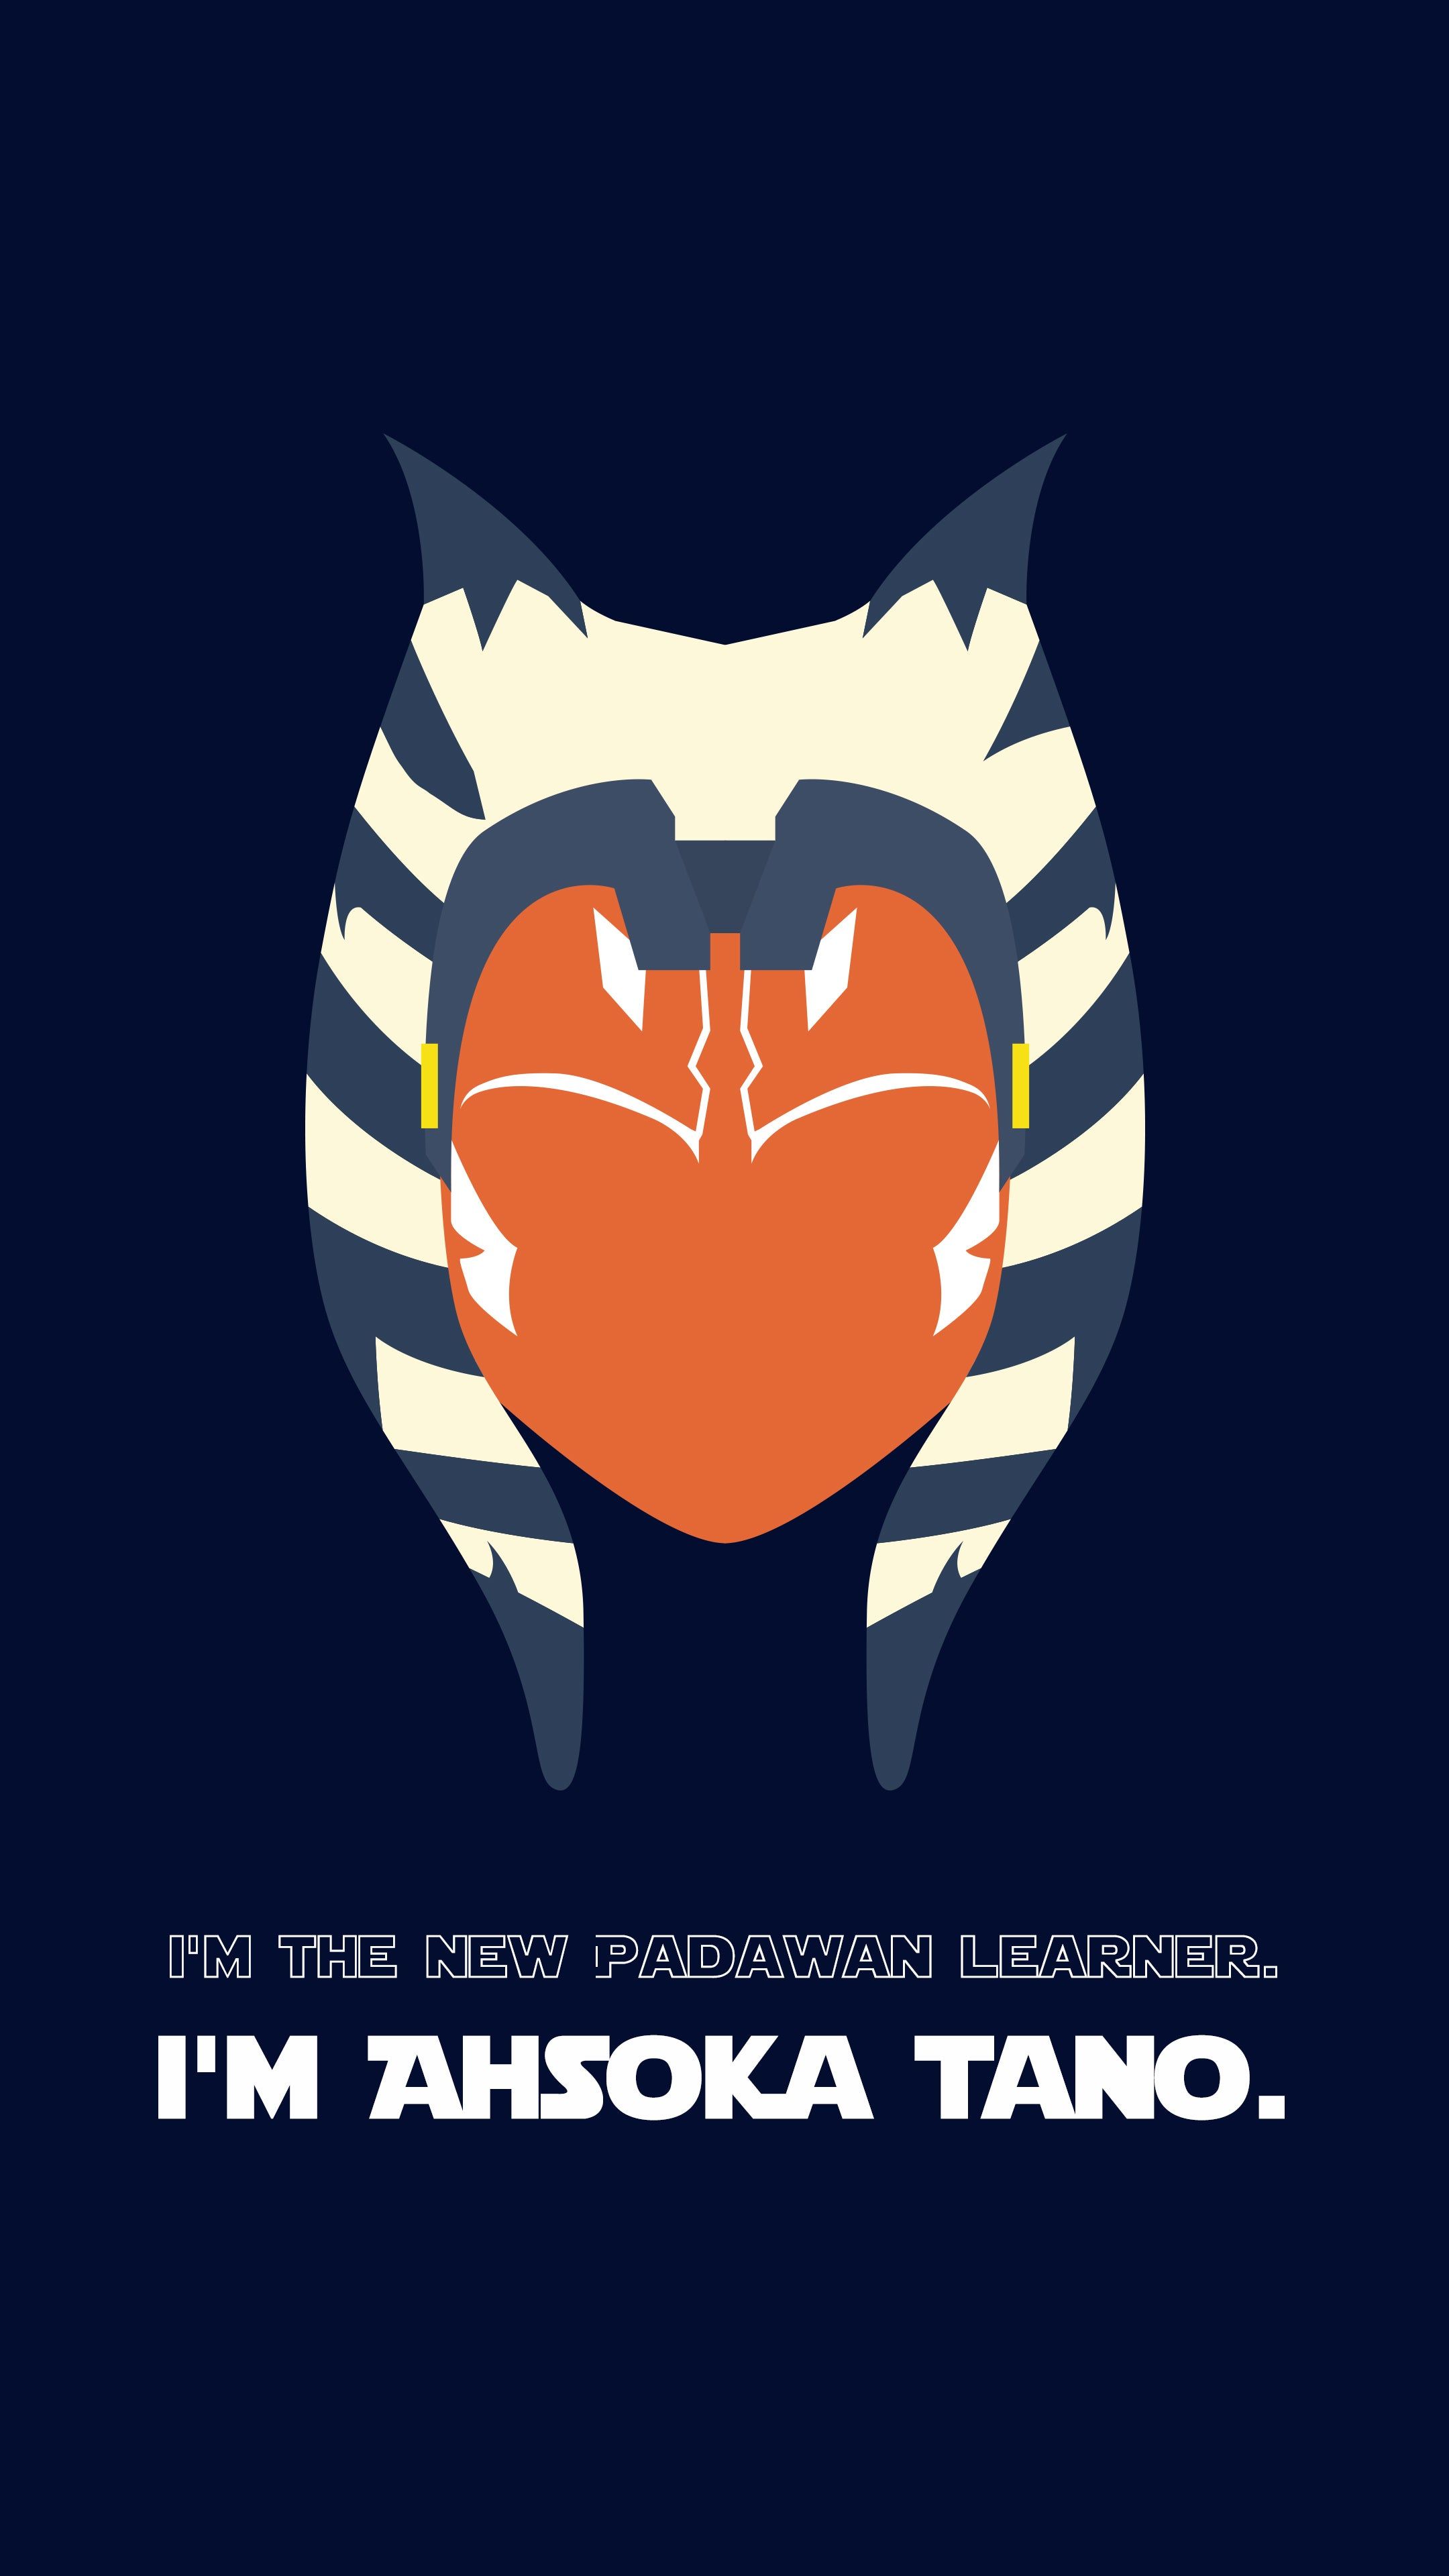 Another Ahsoka Tano wallpaper, this time from the latest season. Really happy how it turned out. (link to desktop and other versions in the comments)